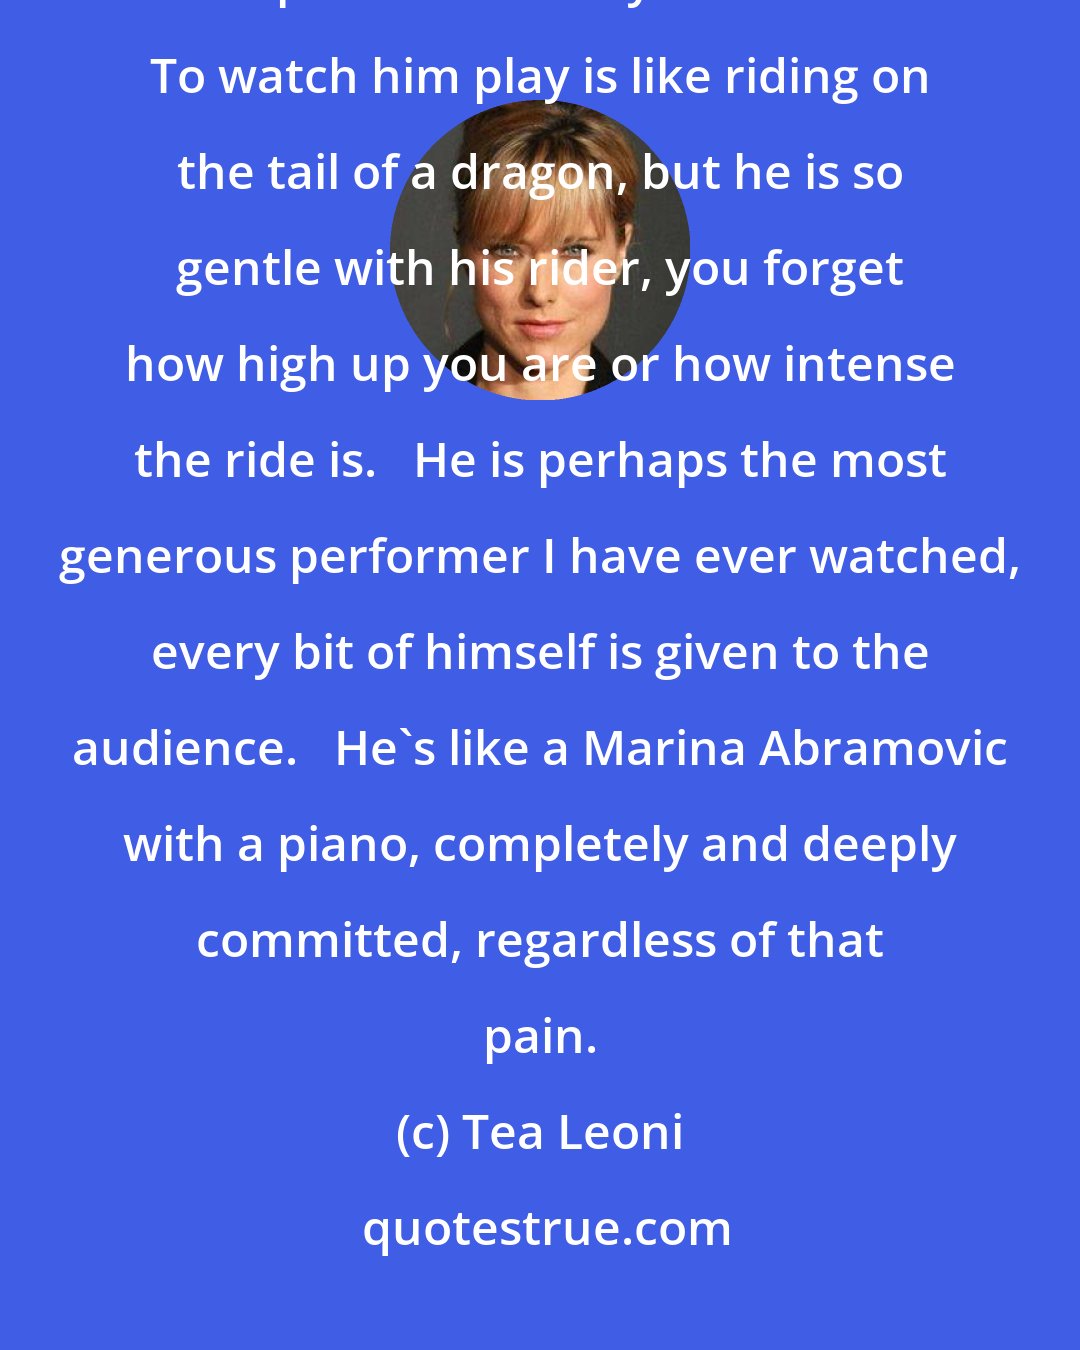 Tea Leoni: Eric's performance is an awesome and entirely honest expression of the pain and beauty of his music. To watch him play is like riding on the tail of a dragon, but he is so gentle with his rider, you forget how high up you are or how intense the ride is.   He is perhaps the most generous performer I have ever watched, every bit of himself is given to the audience.   He's like a Marina Abramovic with a piano, completely and deeply committed, regardless of that pain.